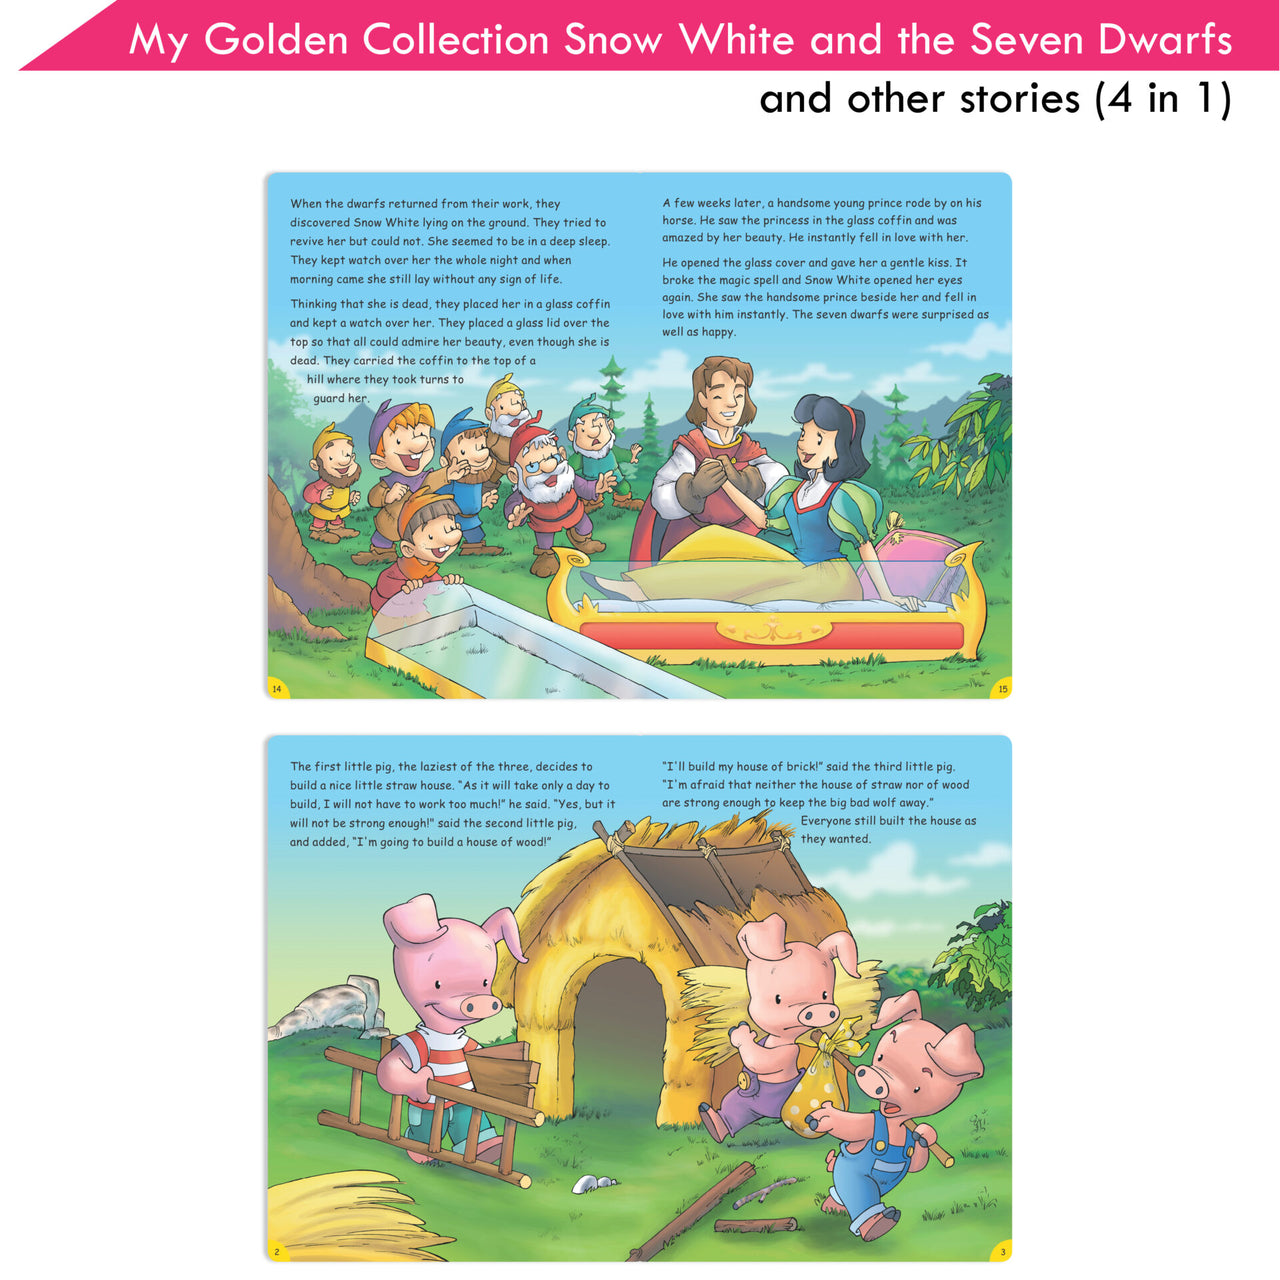 Jolly Kids My Golden Collection Volume 3 Snow White & The Seven Dwarfs & Other 4 in 1 Bedtime Stories| Ages 3-8 Year - Distacart